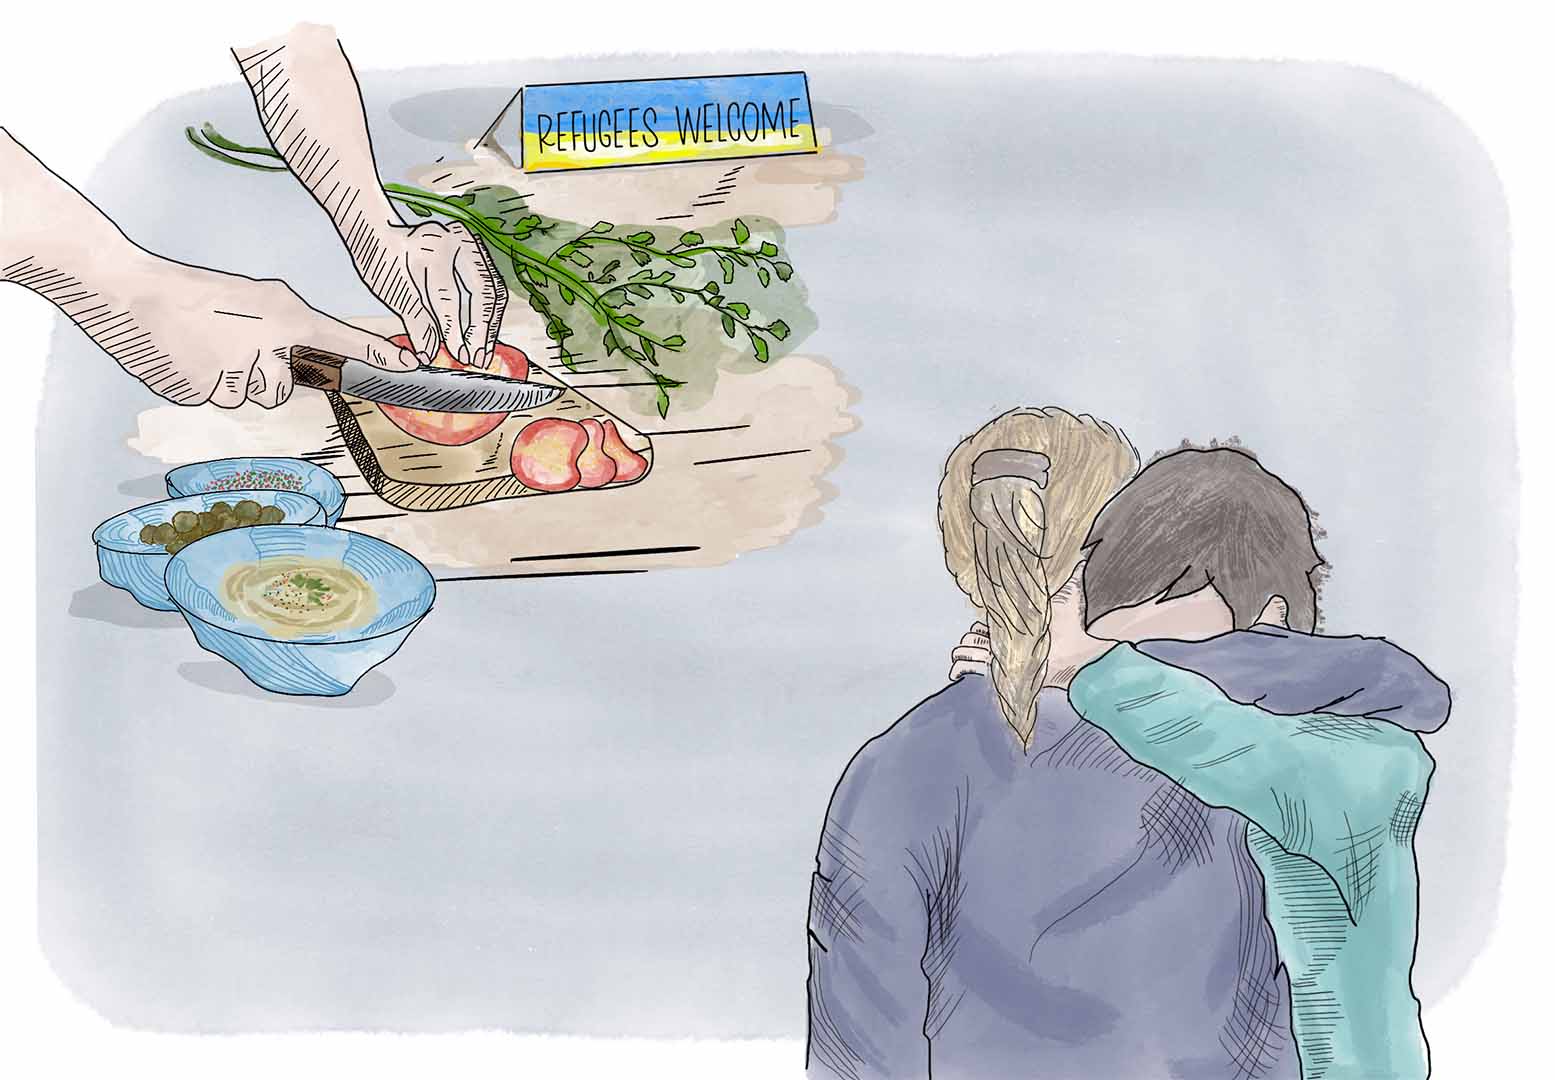 This is an illustration. At the top left we see hands chopping some vegetables over a chopping board, to the side we see hummus and a small sign with the Ukraine flag colors with the words "Refugees Welcome" on it. At the bottom right, we see an illustration version of Nadwa and her son Tammam embracing.